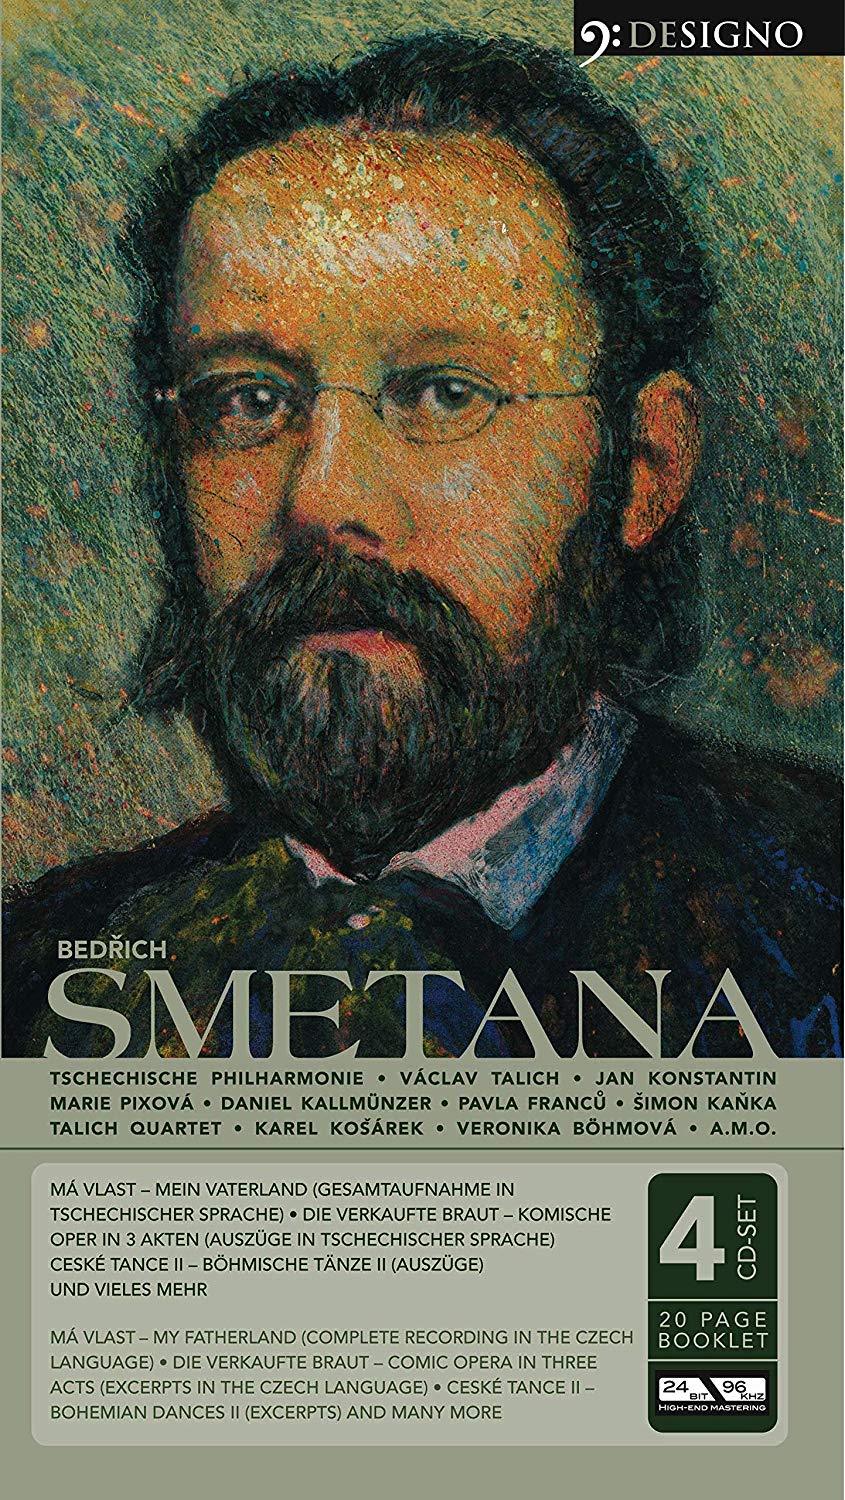 SMETANA: ORCHESTRAL, OPERA and CHAMBER WORKS (4 CDS)